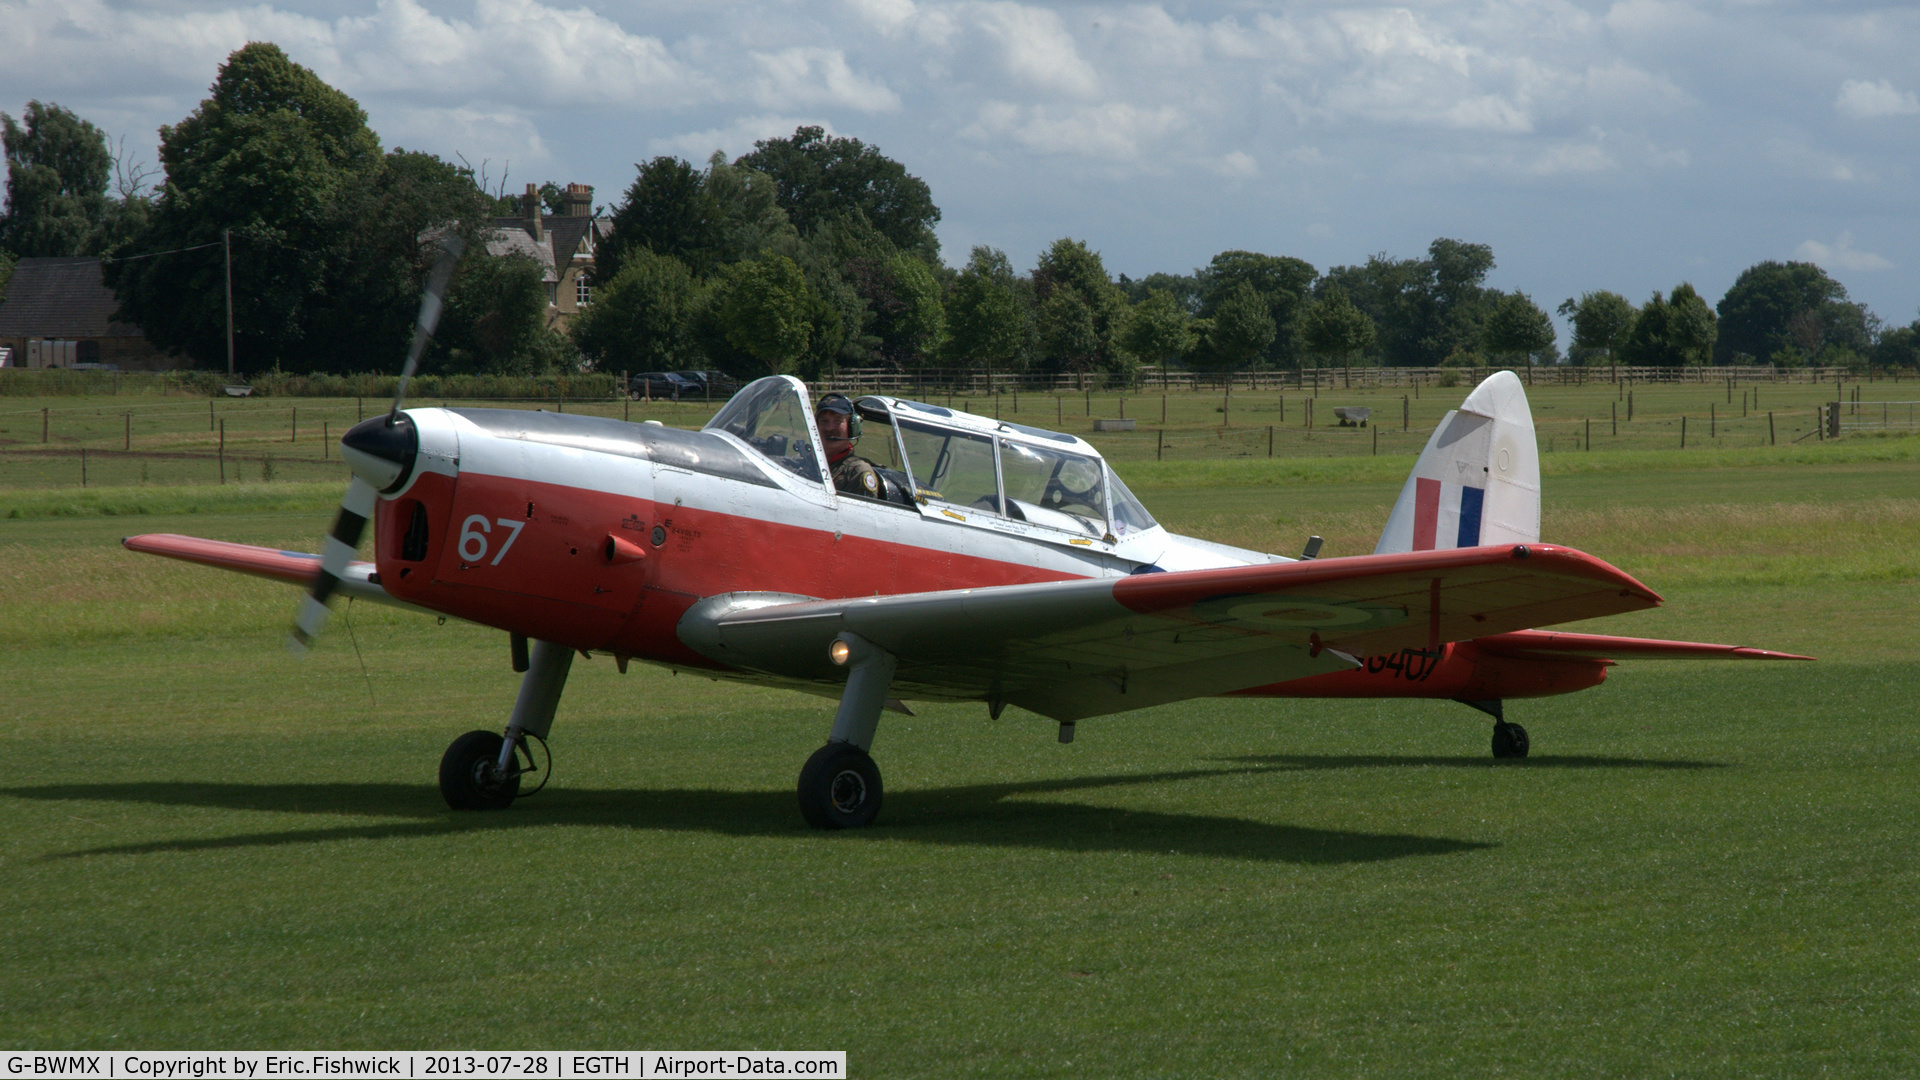 G-BWMX, 1951 De Havilland DHC-1 Chipmunk T.10 C/N C1/0481, 3. WG407 at The Shuttleworth Collection Wings & Wheels Flying Day, July 2013.